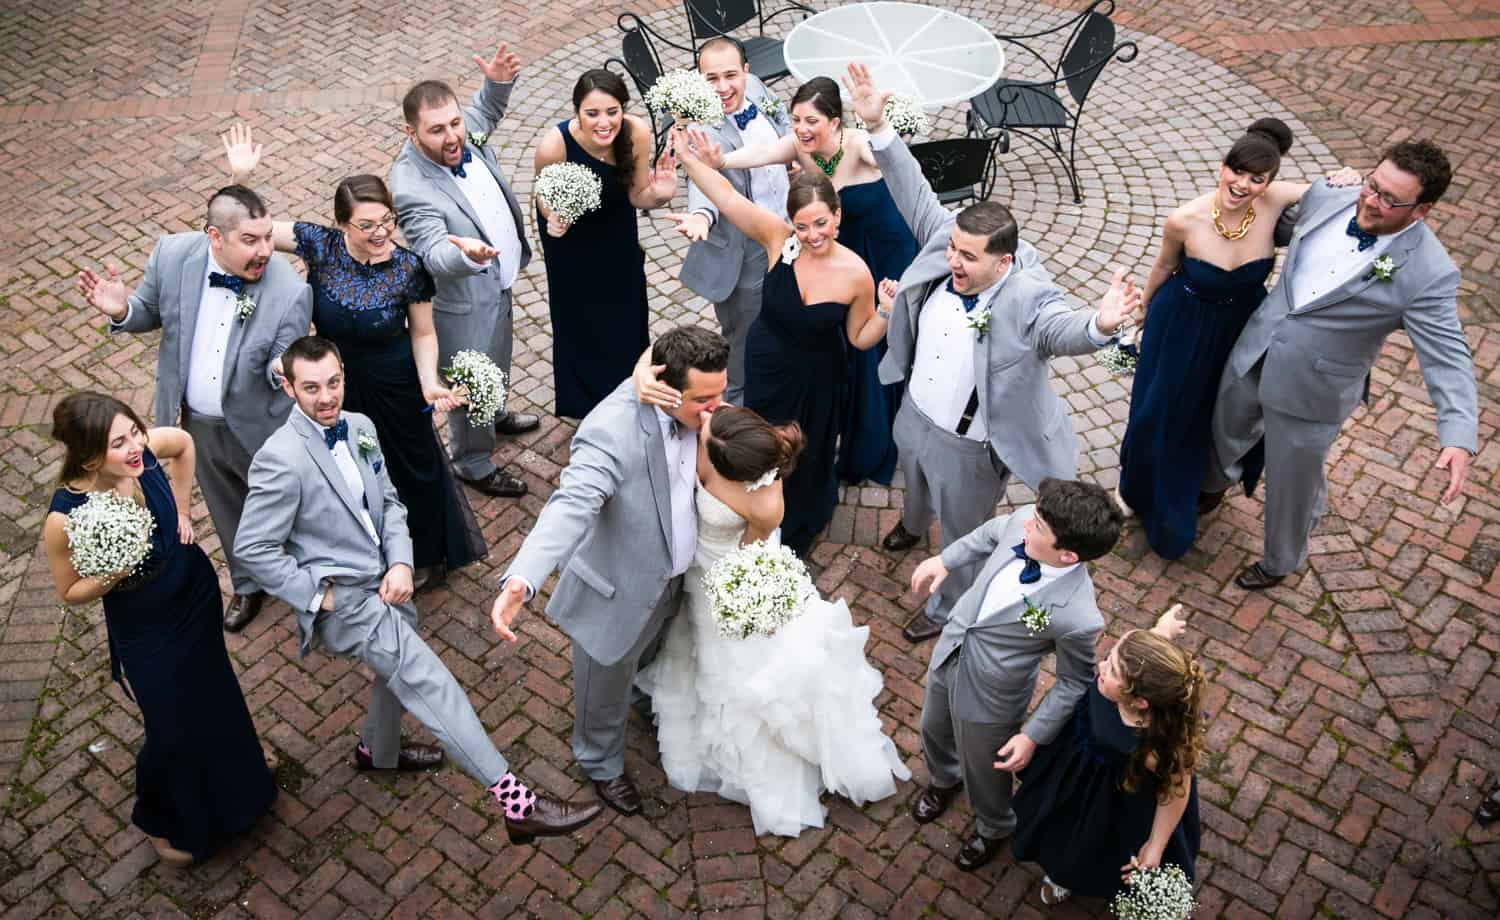 View down on bridal party cheering bride and groom dancing